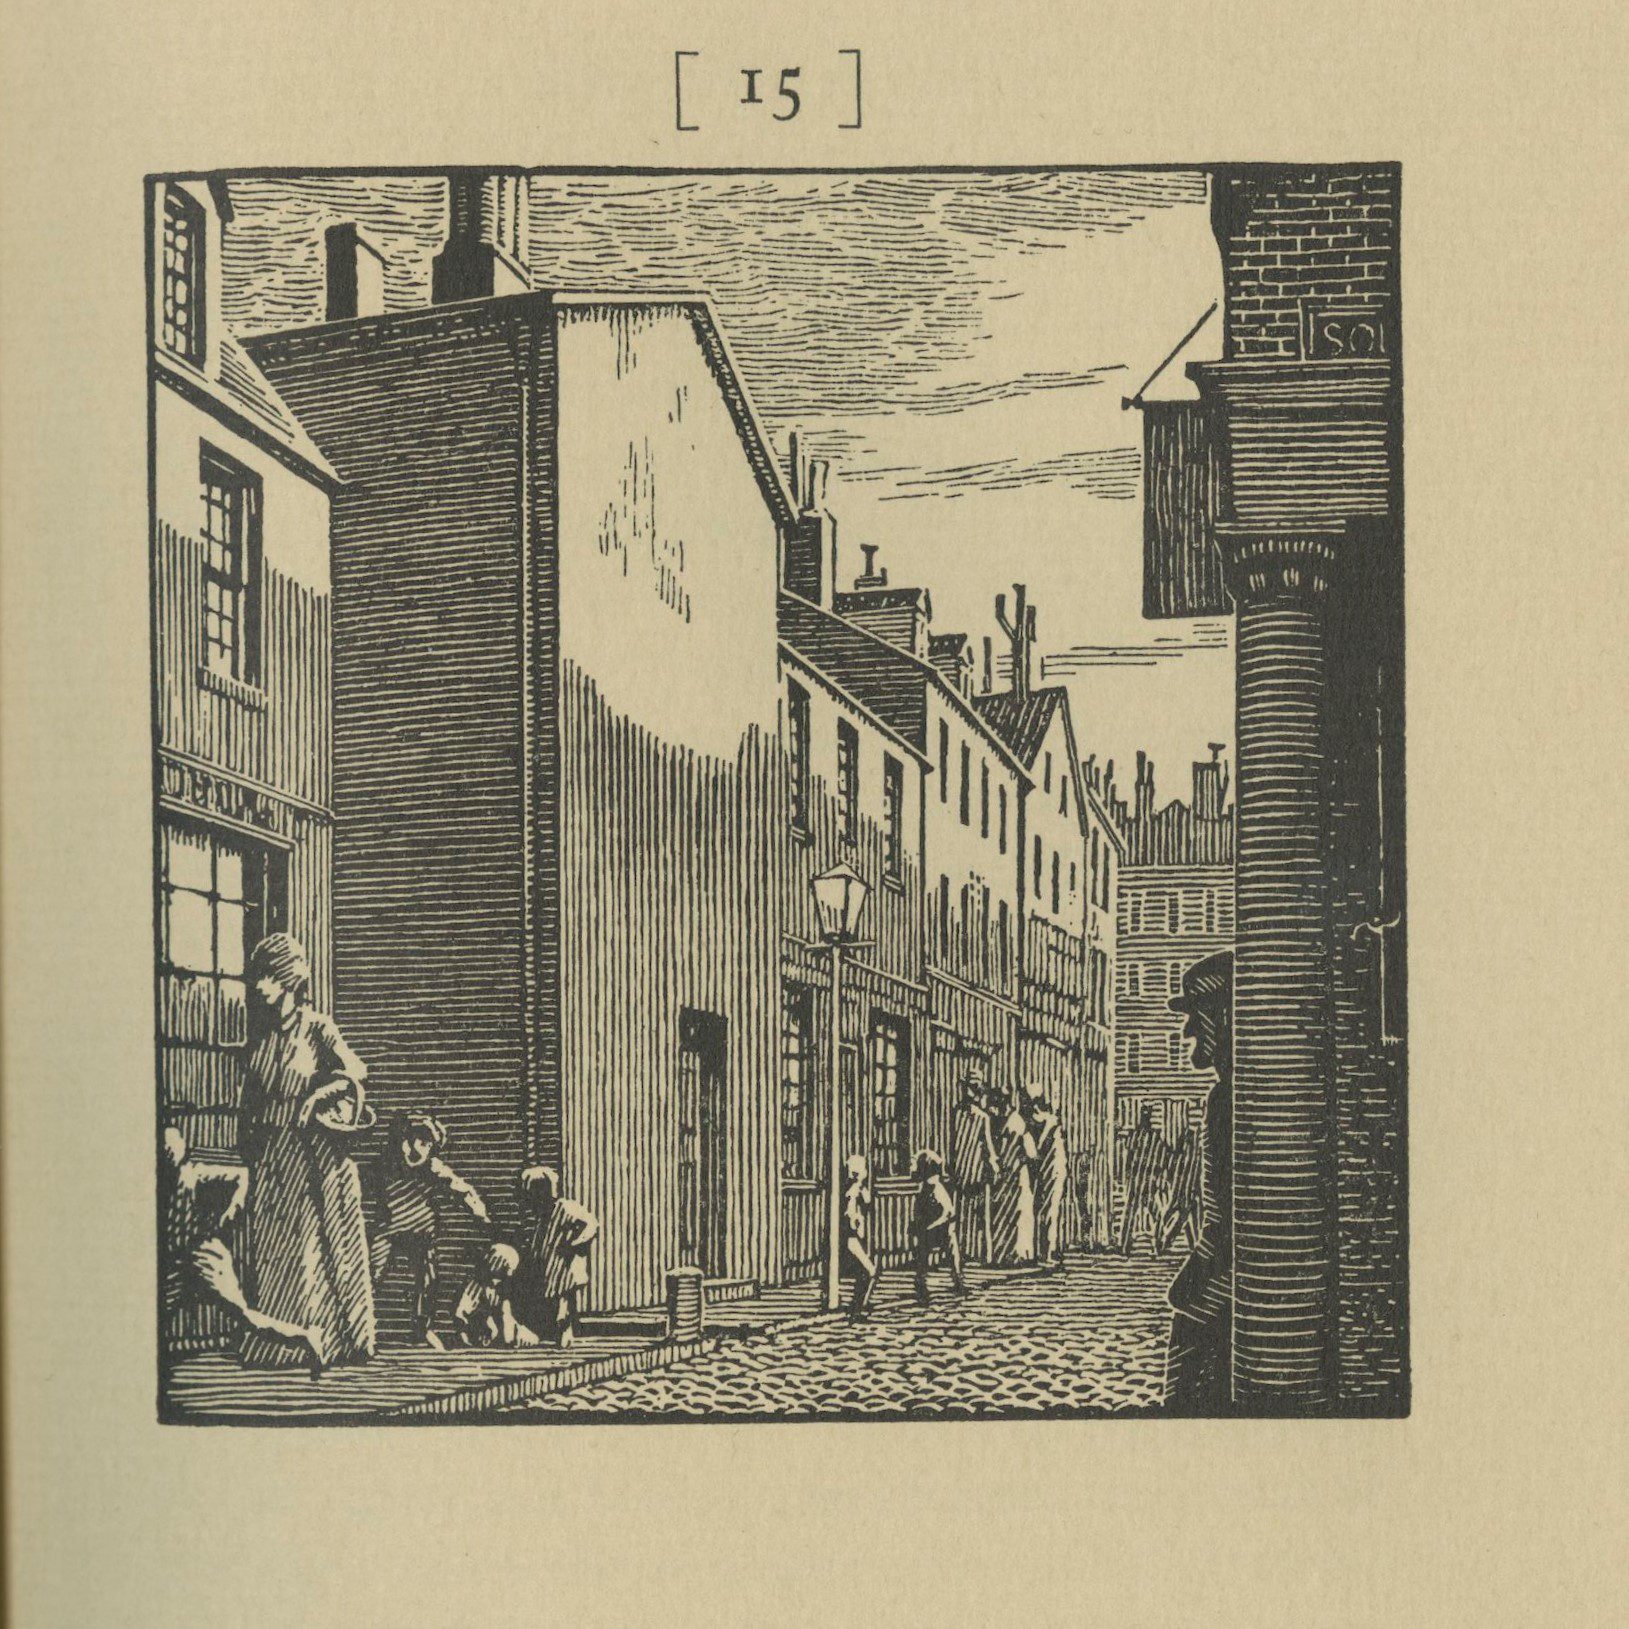 Illustration by W. A. Diggins depicting a busy street.